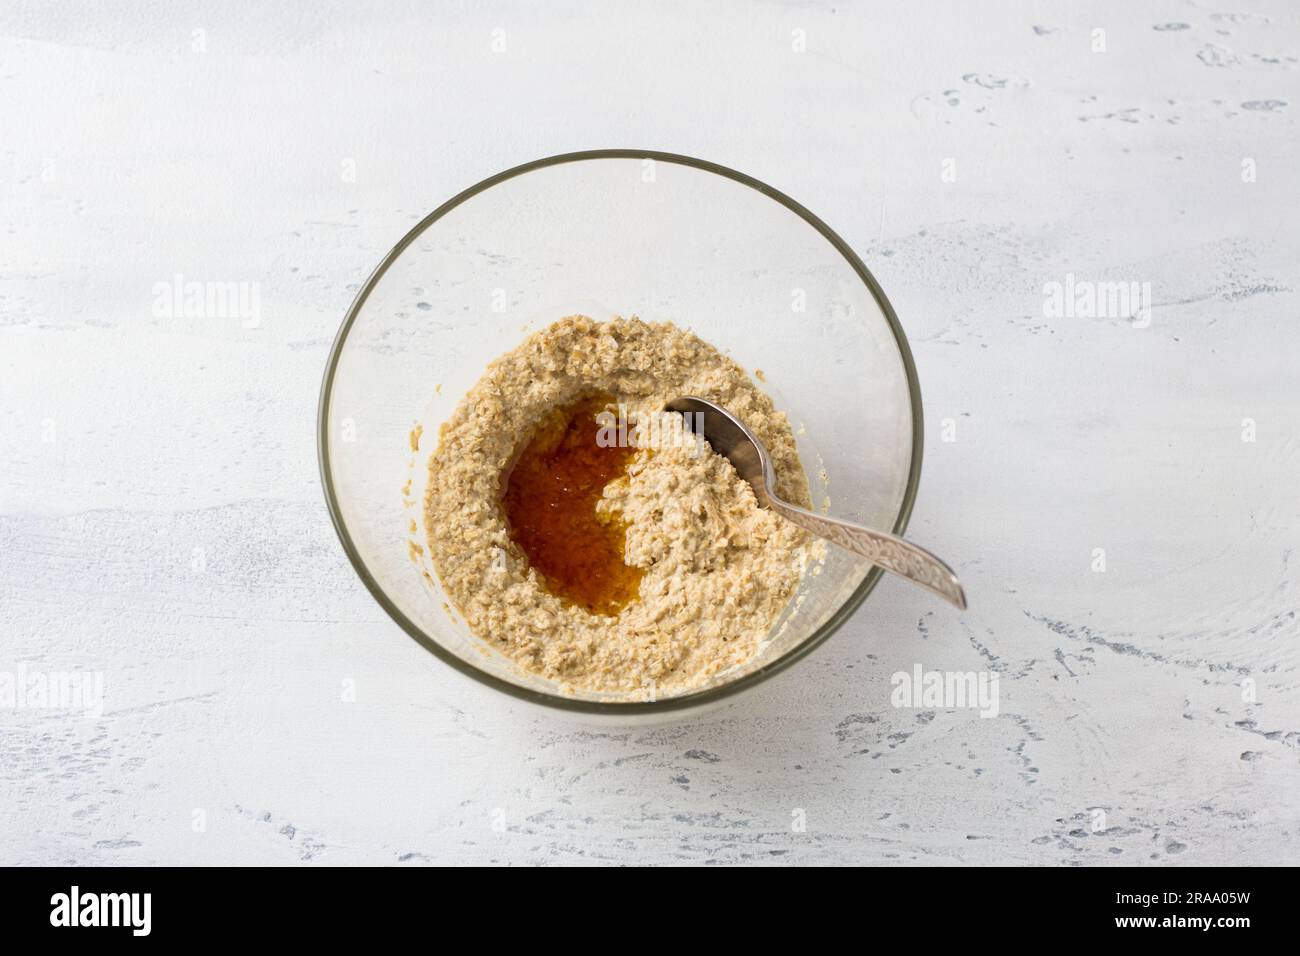 Glass bowl with soaked oatmeal and honey on a light blue table, top view. Cooking delicious healthy vegan dessert or other dish. Stock Photo